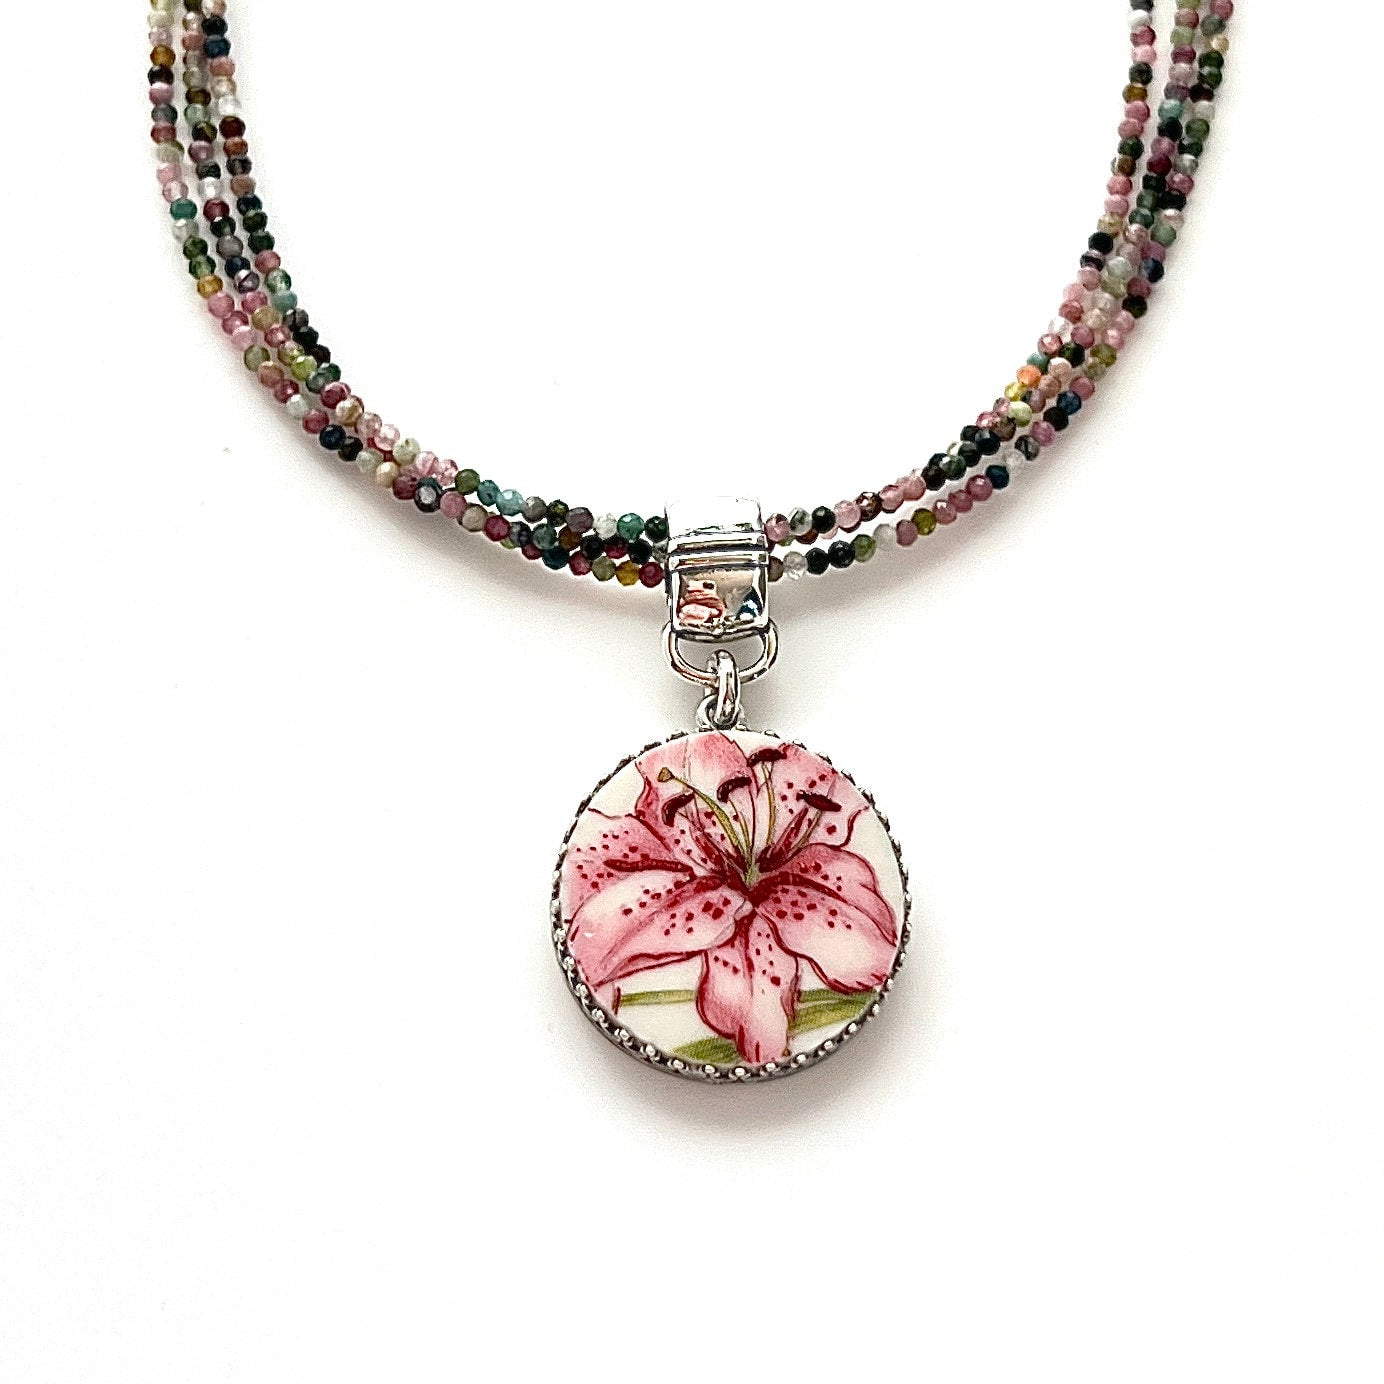 CUSTOM ORDER Large Round China Necklace with Gemstone Chain, Made From Your Family China, Custom Broken China Jewelry, Unique Jewelry Gifts